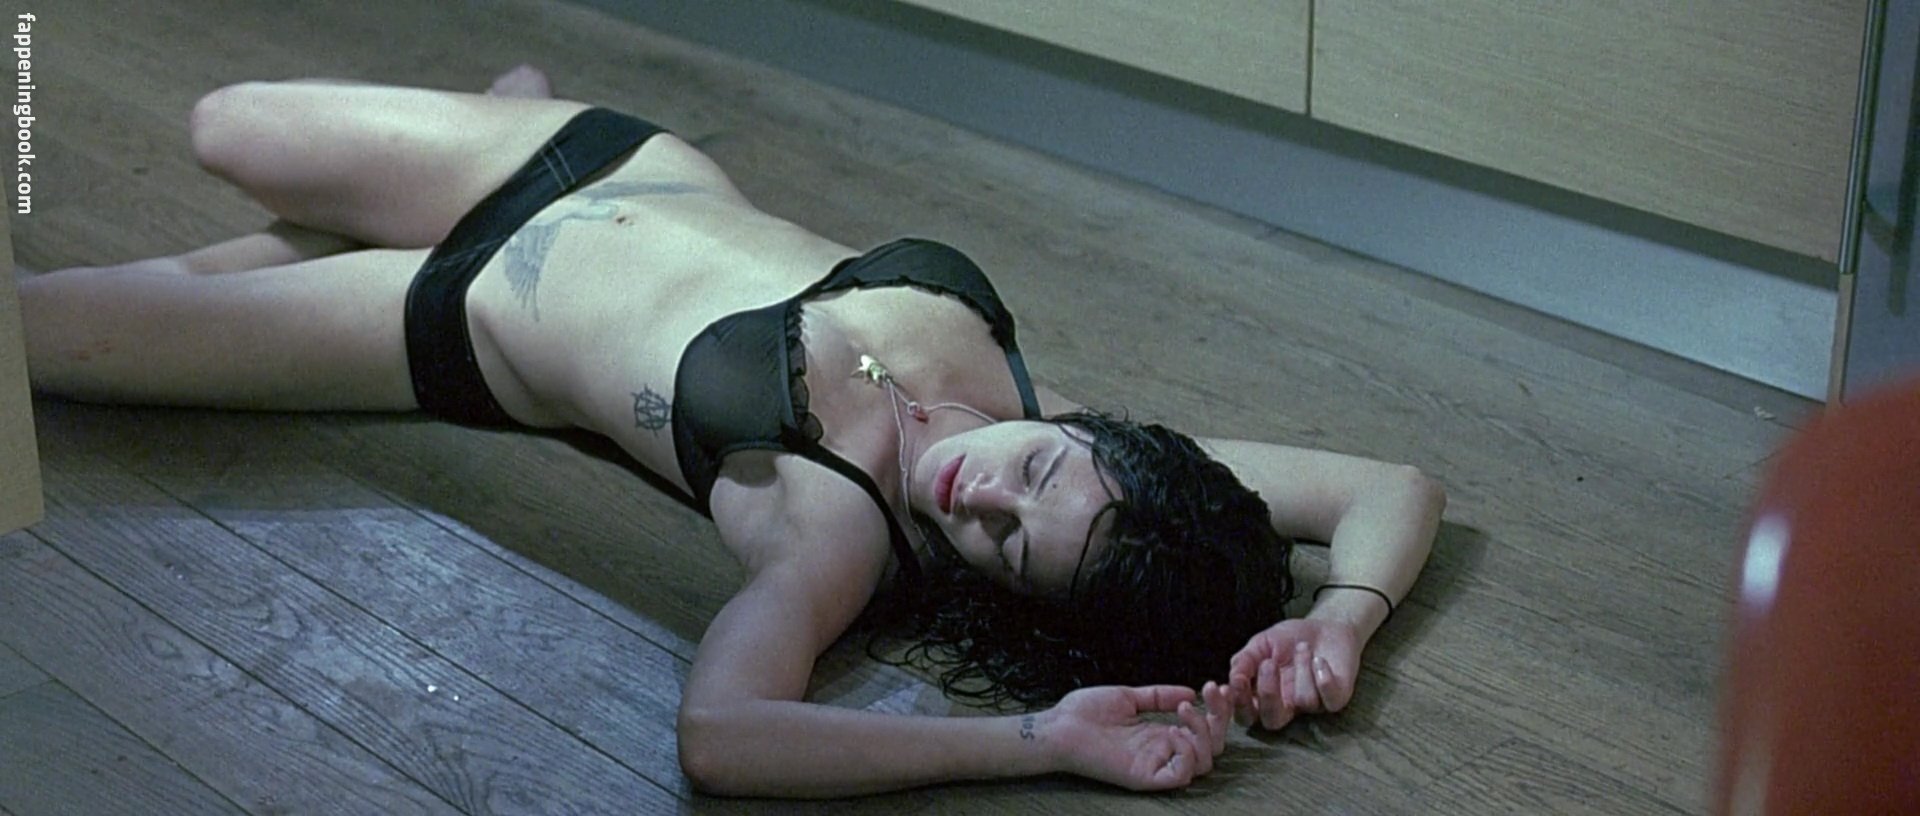 Fappening asia argento Dlisted